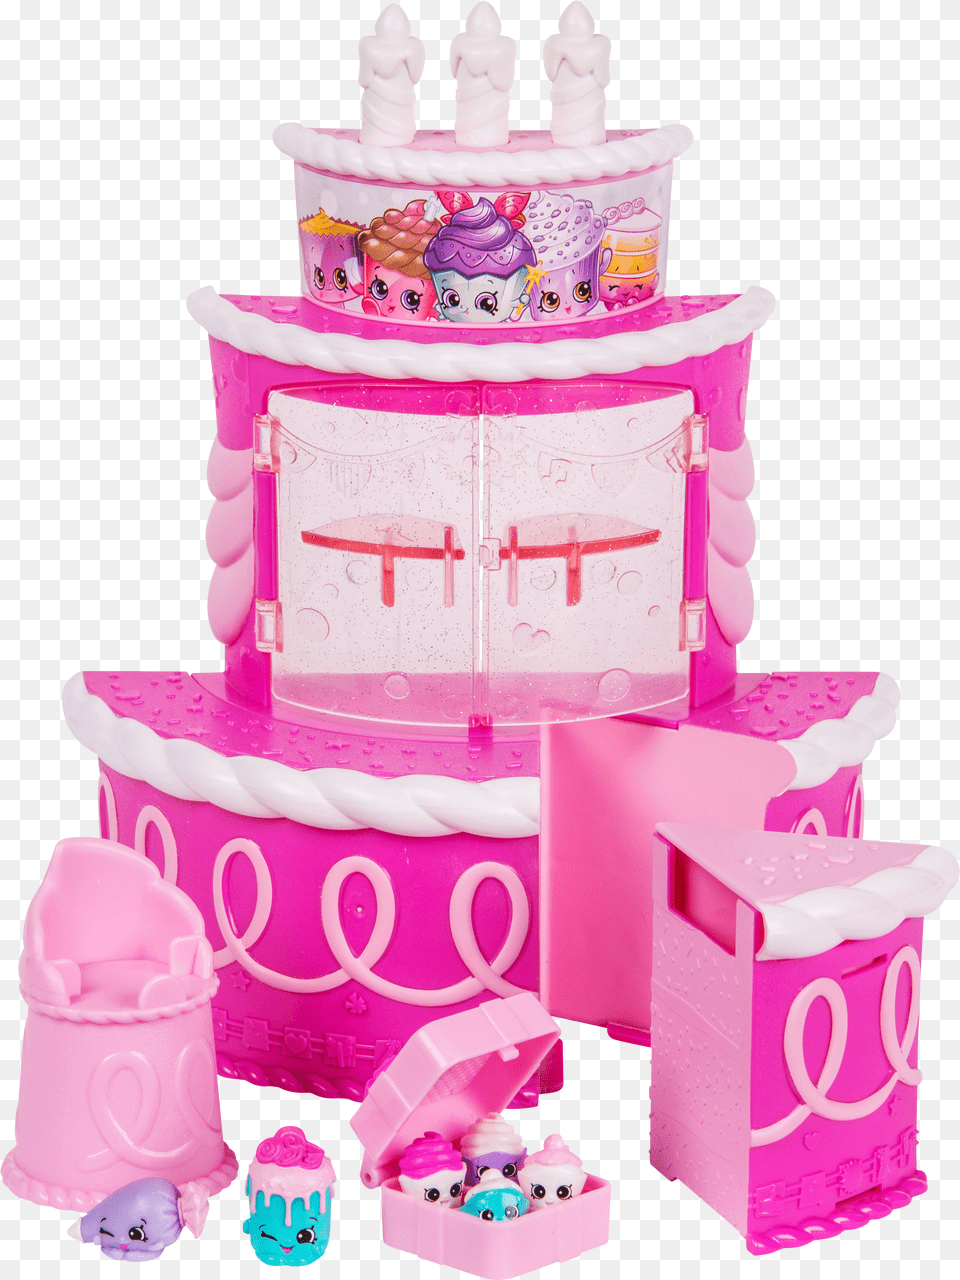 Spks7 Cakesurprise Out Face Shopkins Season 7 Join The Party Birthday Cake Surprise Png Image